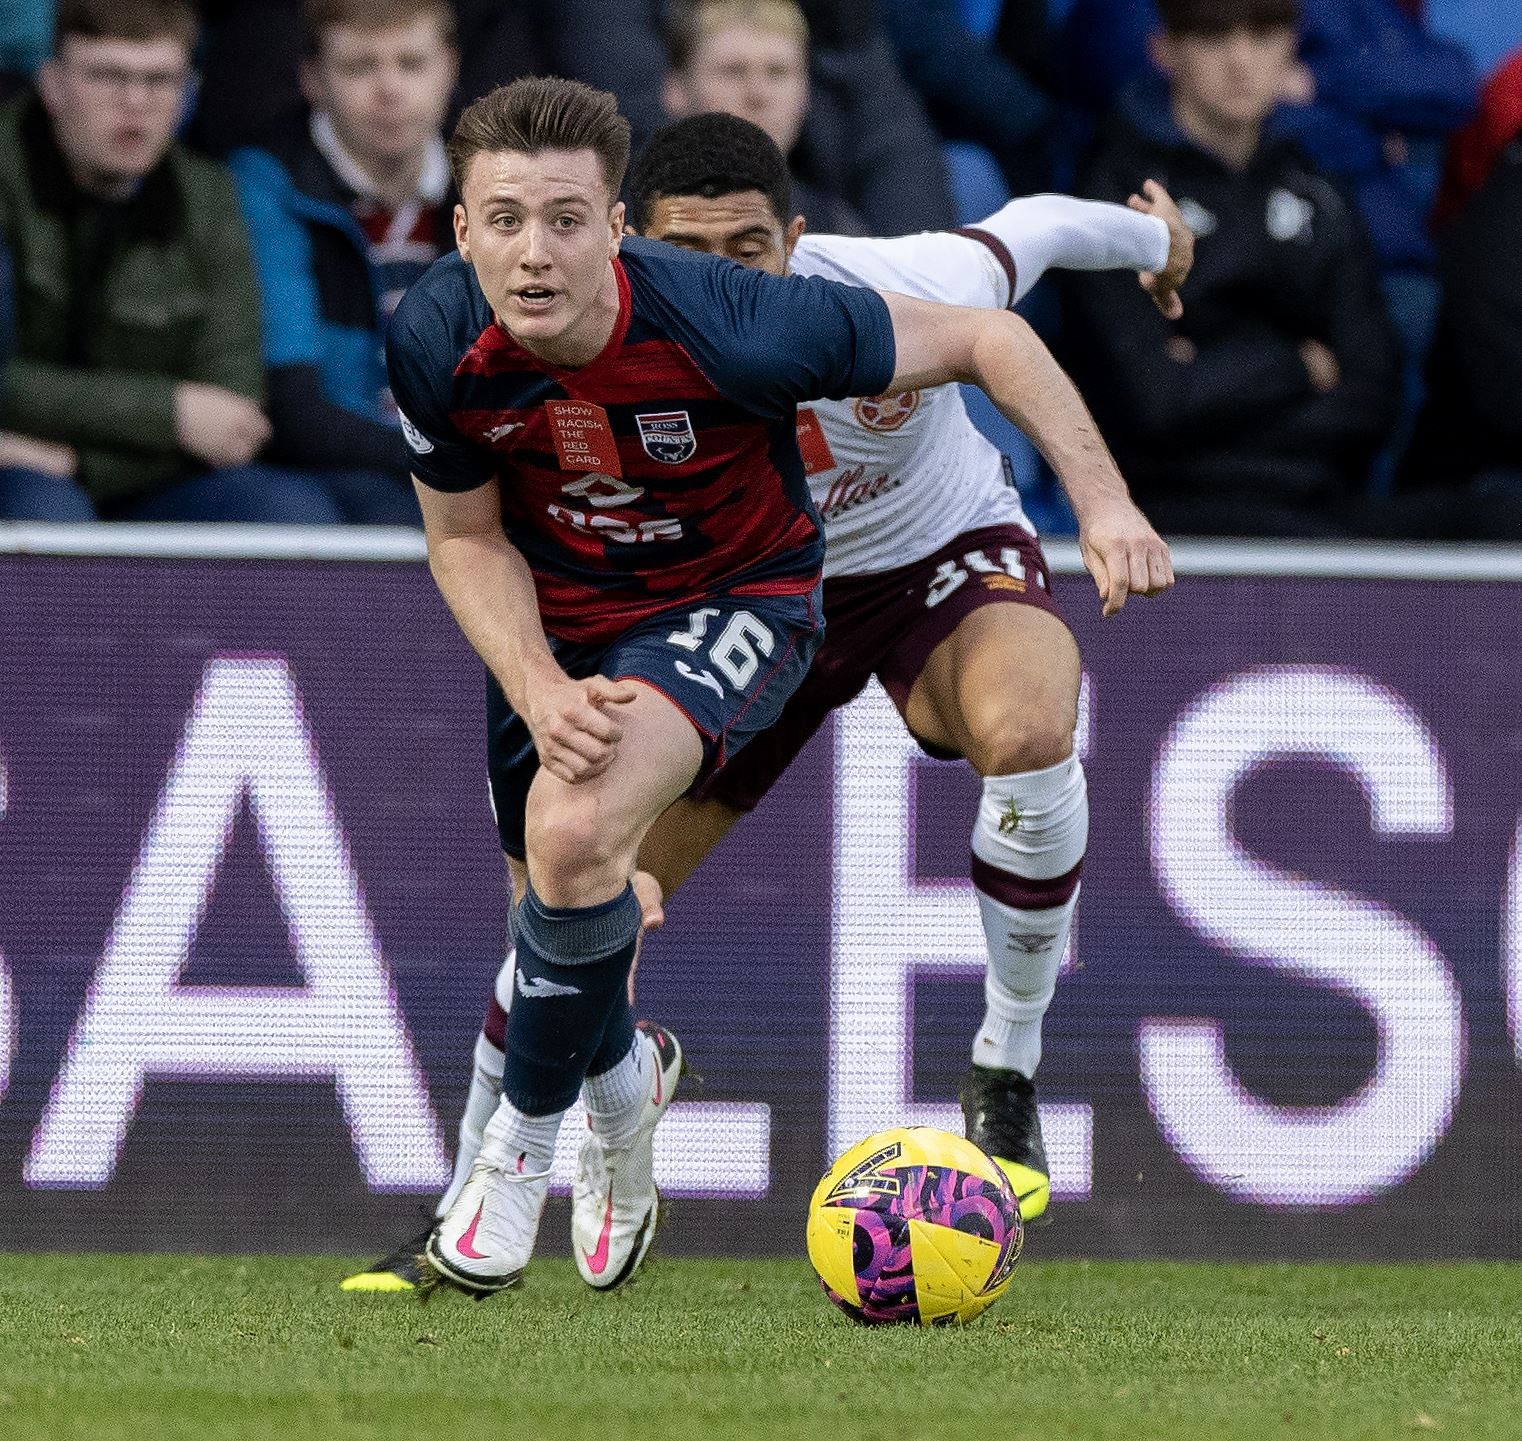 Picture - Ken Macpherson. Ross County(1) v Hearts(2). 30/10/22. Ross County's George Harmon gets away from Hearts' Josh Ginnelly.